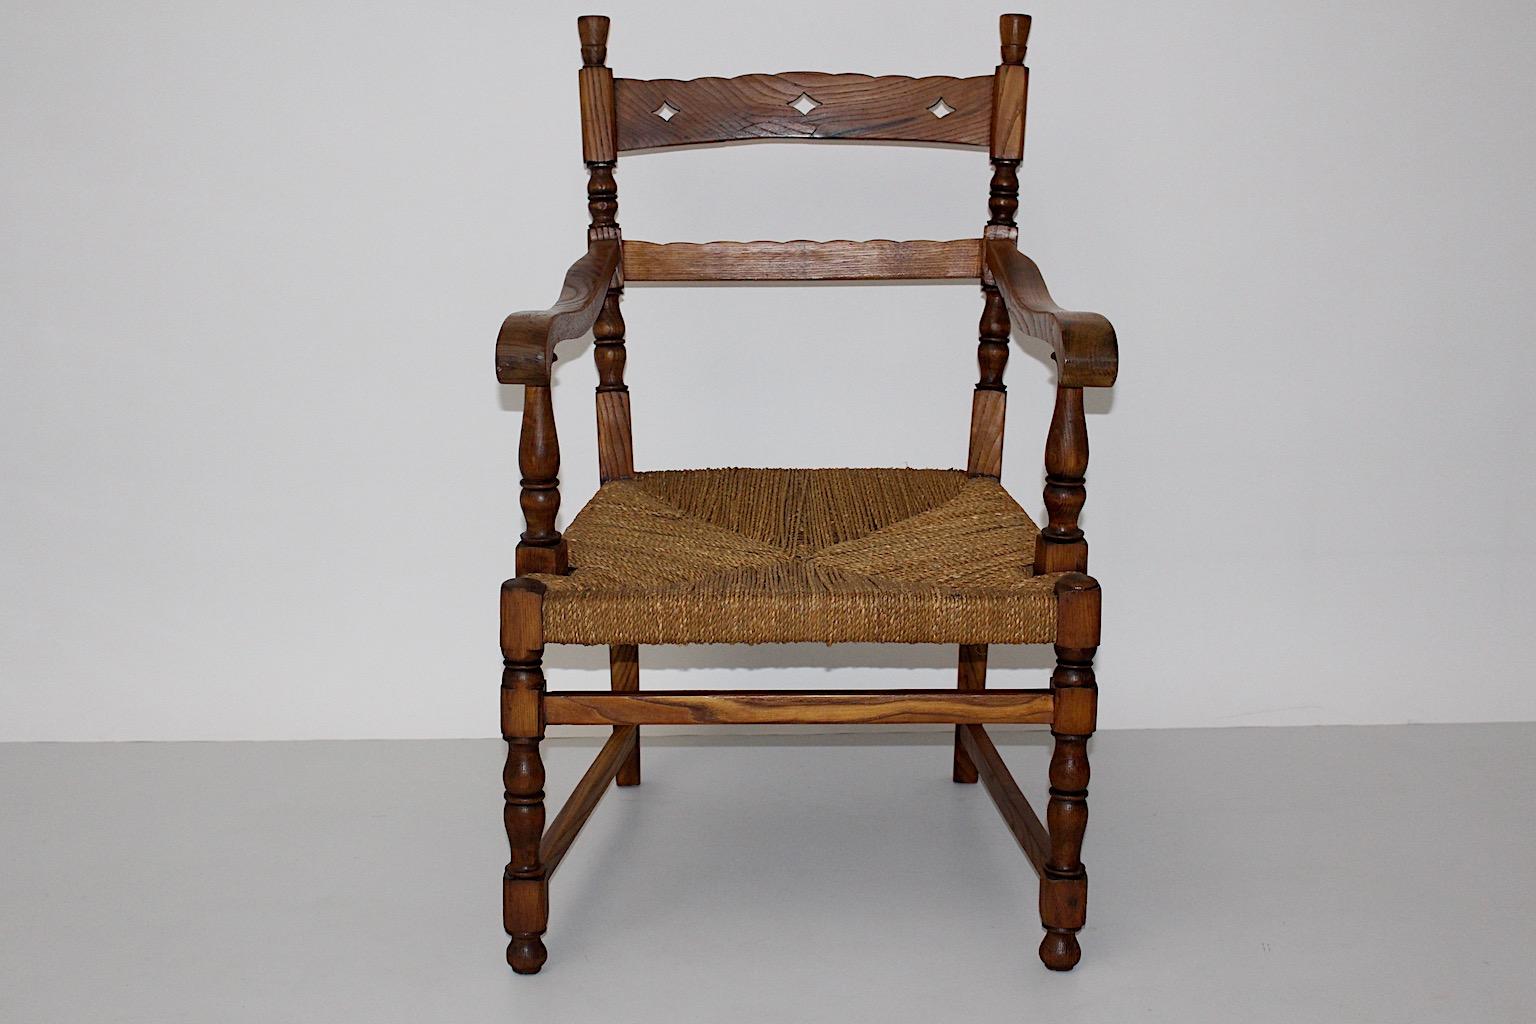 Art Deco Rustic vintage armchair from ash designed and executed in Vienna, circa 1925 design attributed to Oskar Strnad.
This beautiful armchair shows a frame from solid turned ash wood in a warm brown color also the seat features a sisal cord